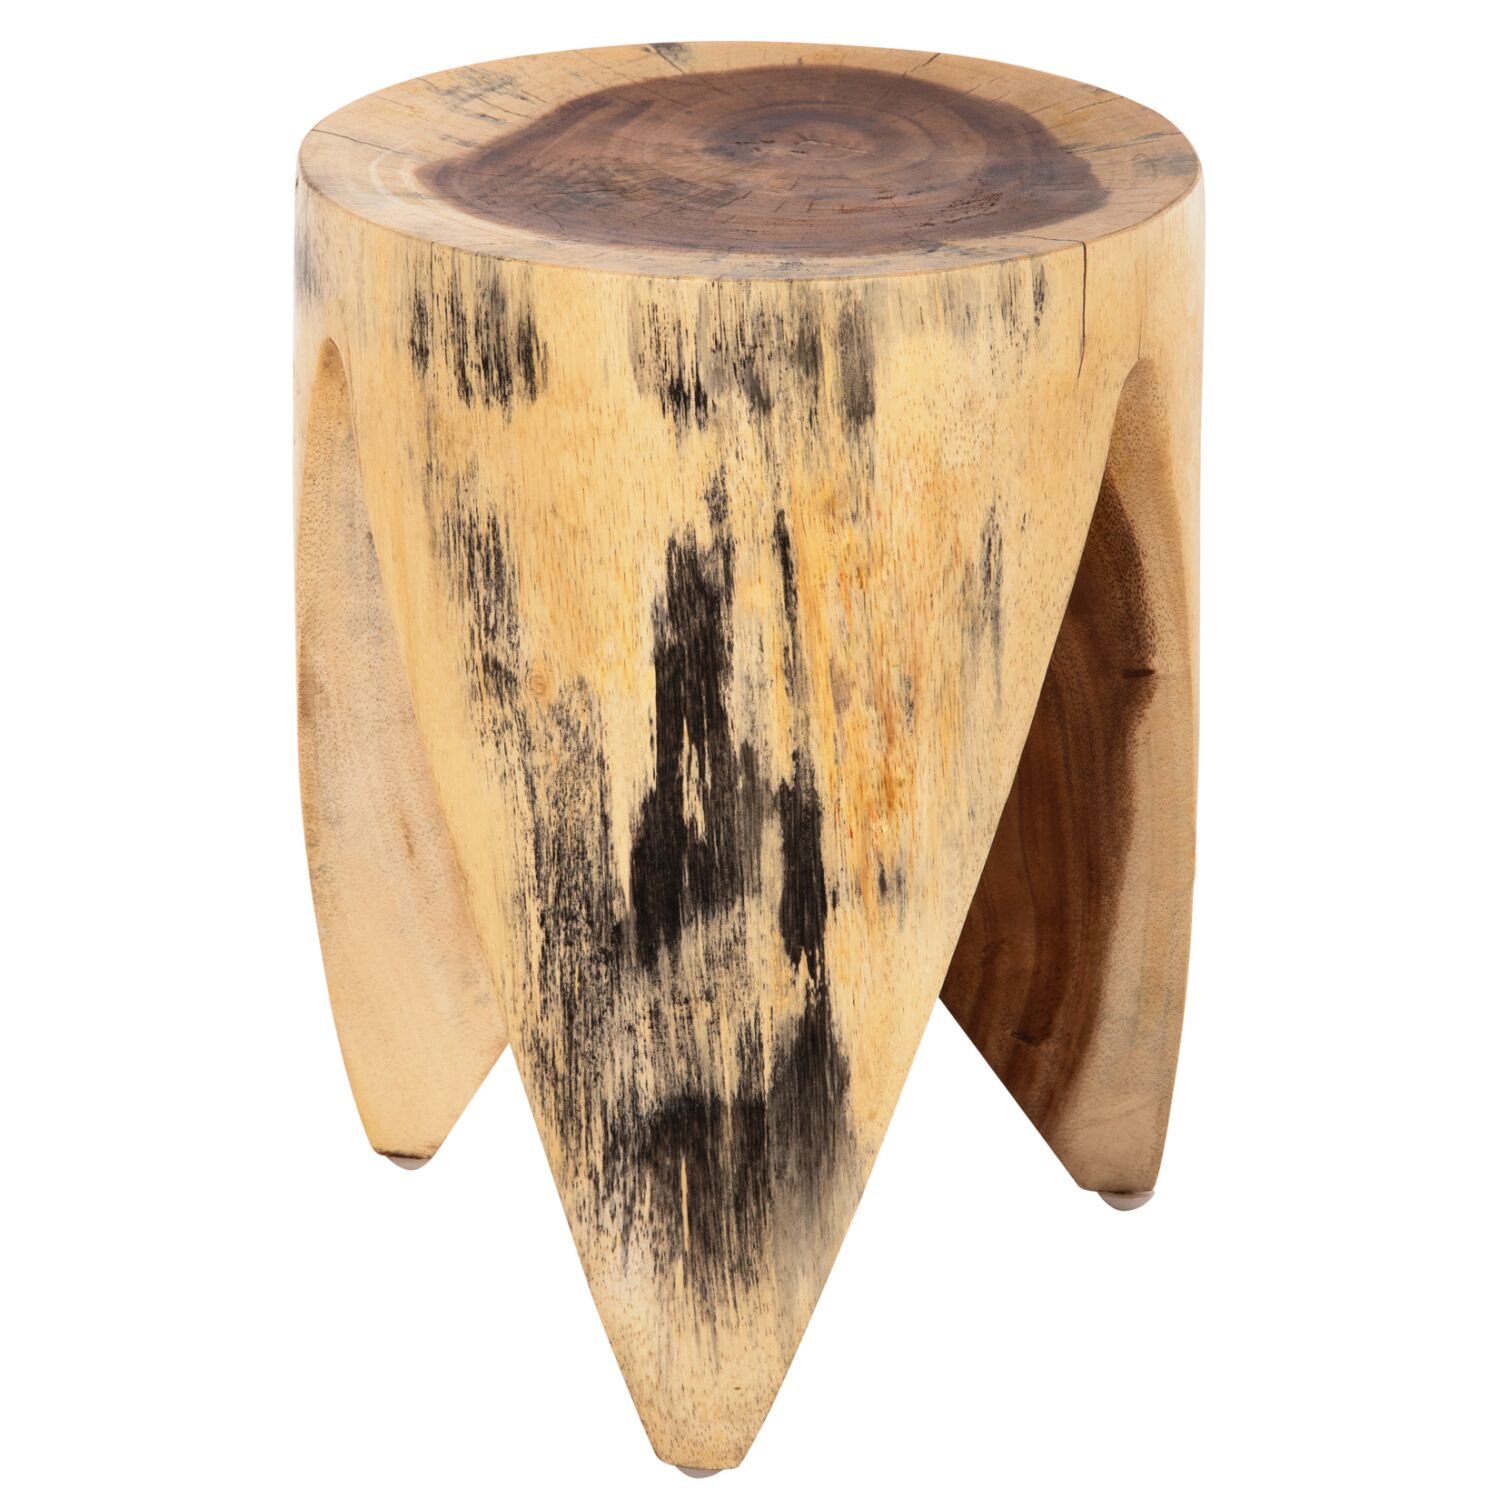 STOOL ONYX HM9755 SOLID SUAR WOOD IN NATURAL COLOR-CLAW SHAPE Φ30Χ40Hcm.